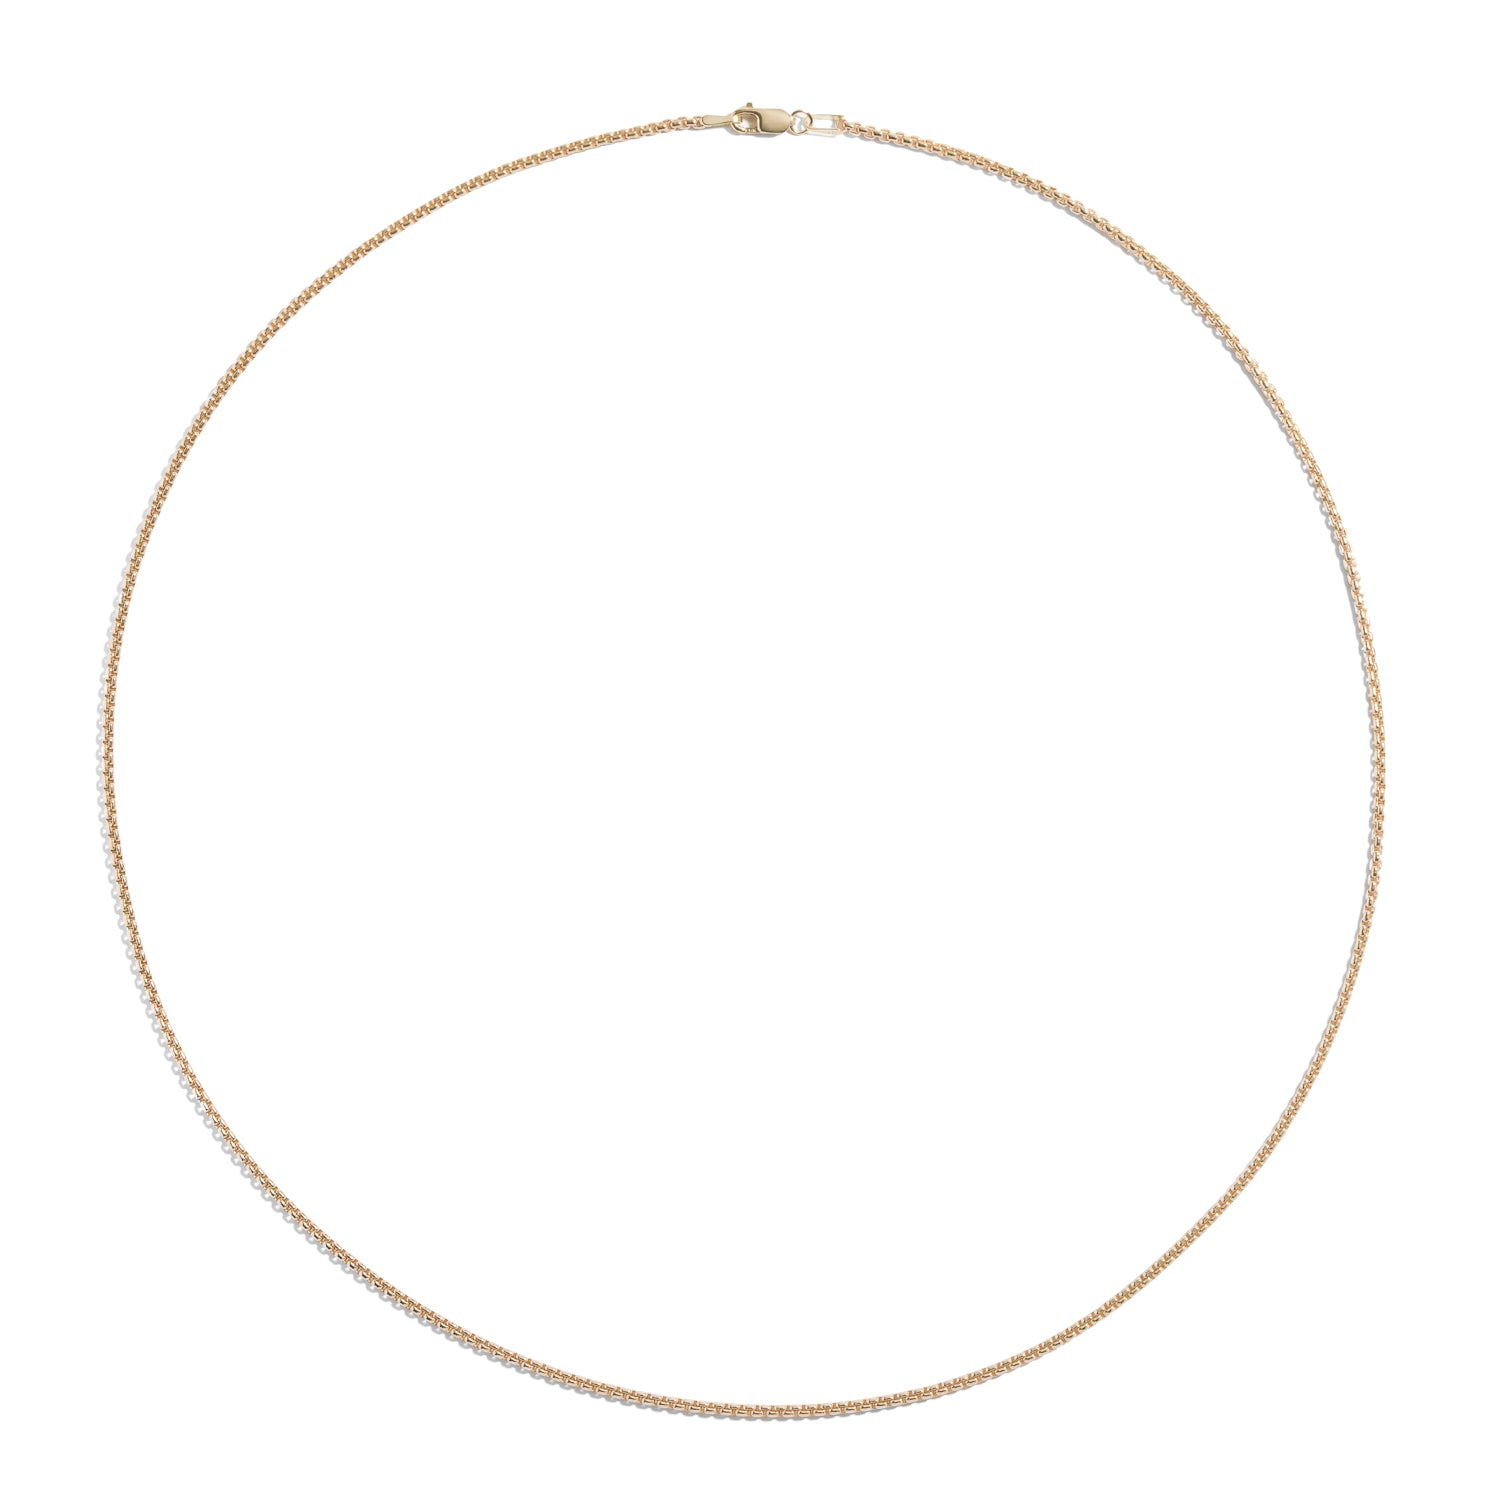 Shahla Karimi 1.7mm Rounded Box Chain 20" 14K Yellow Gold